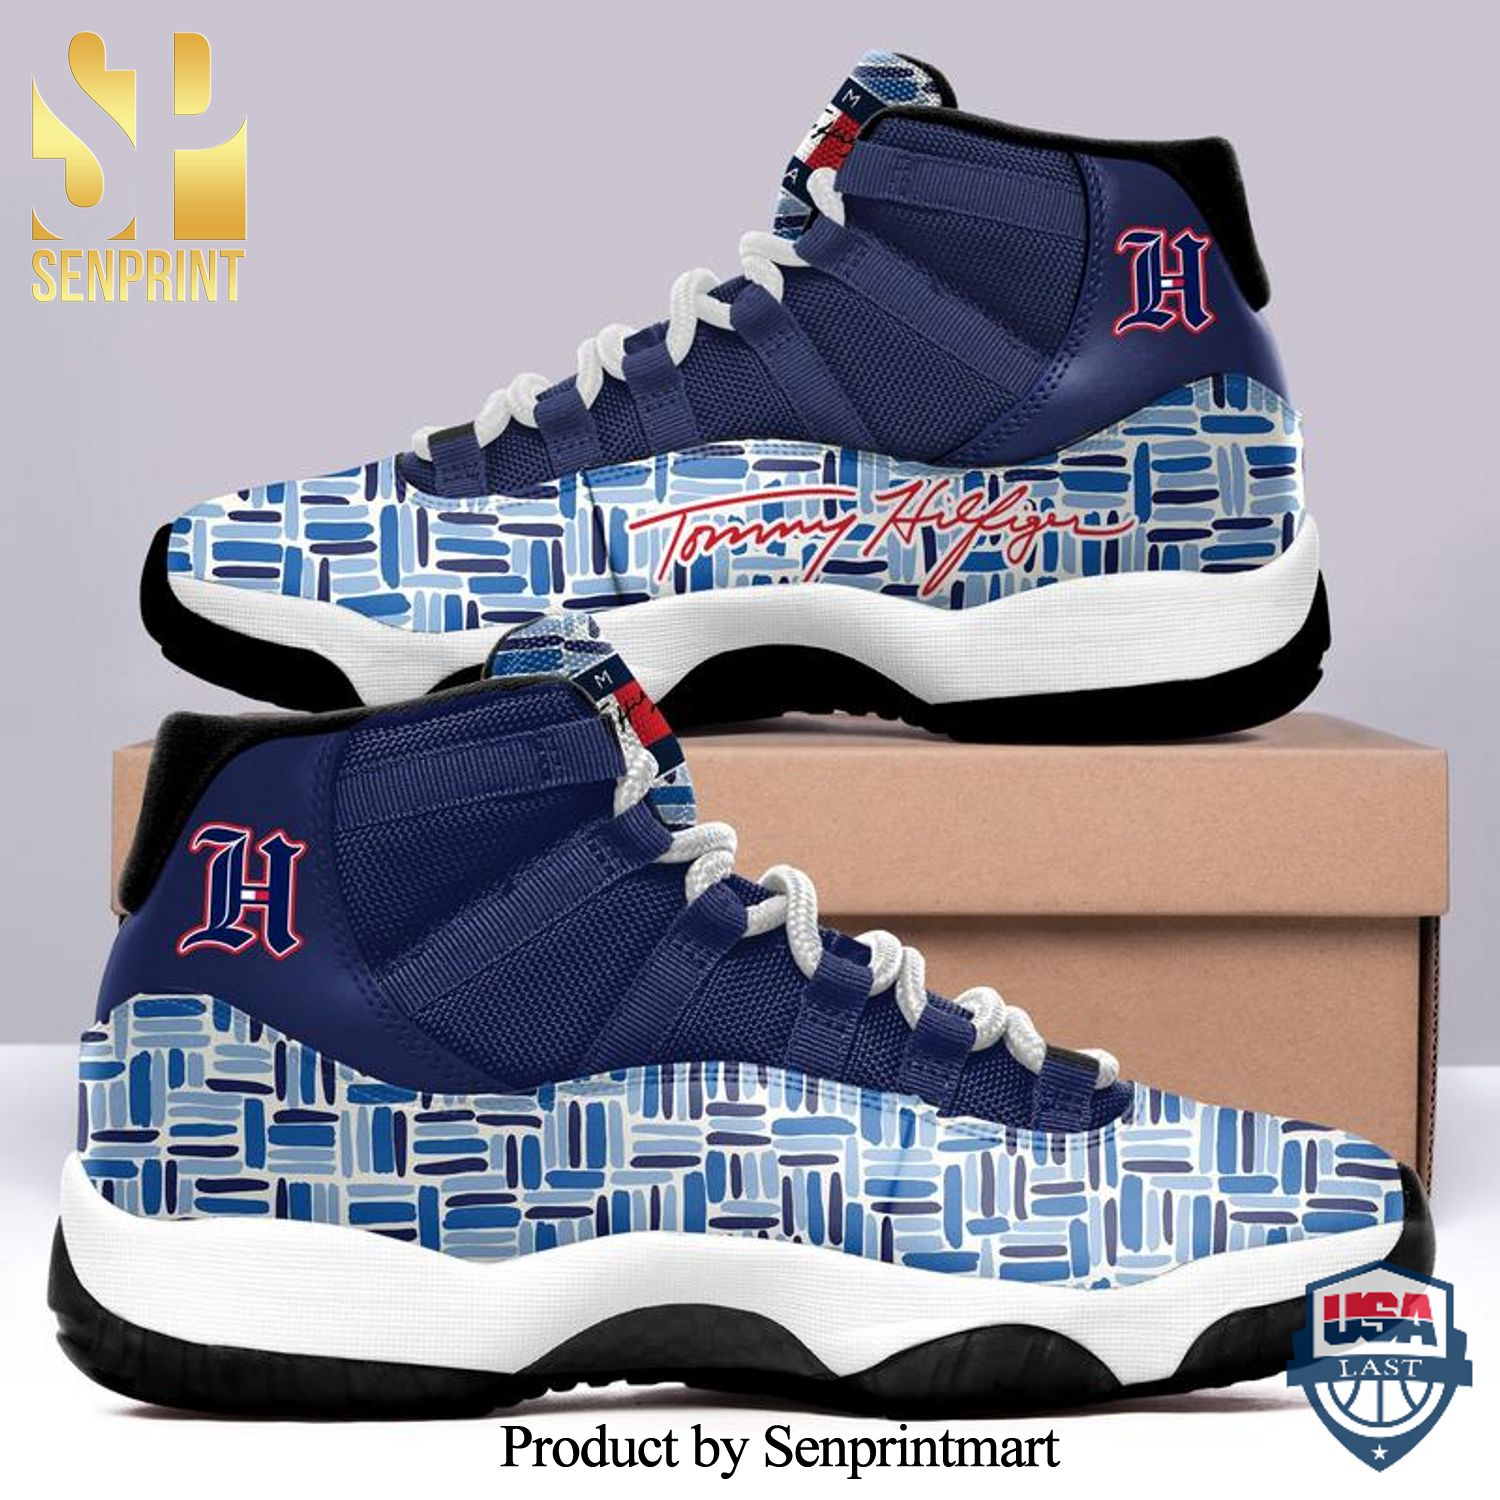 Tommy hilfiger stripes sneaker New Outfit Full Printed Air Jordan 11